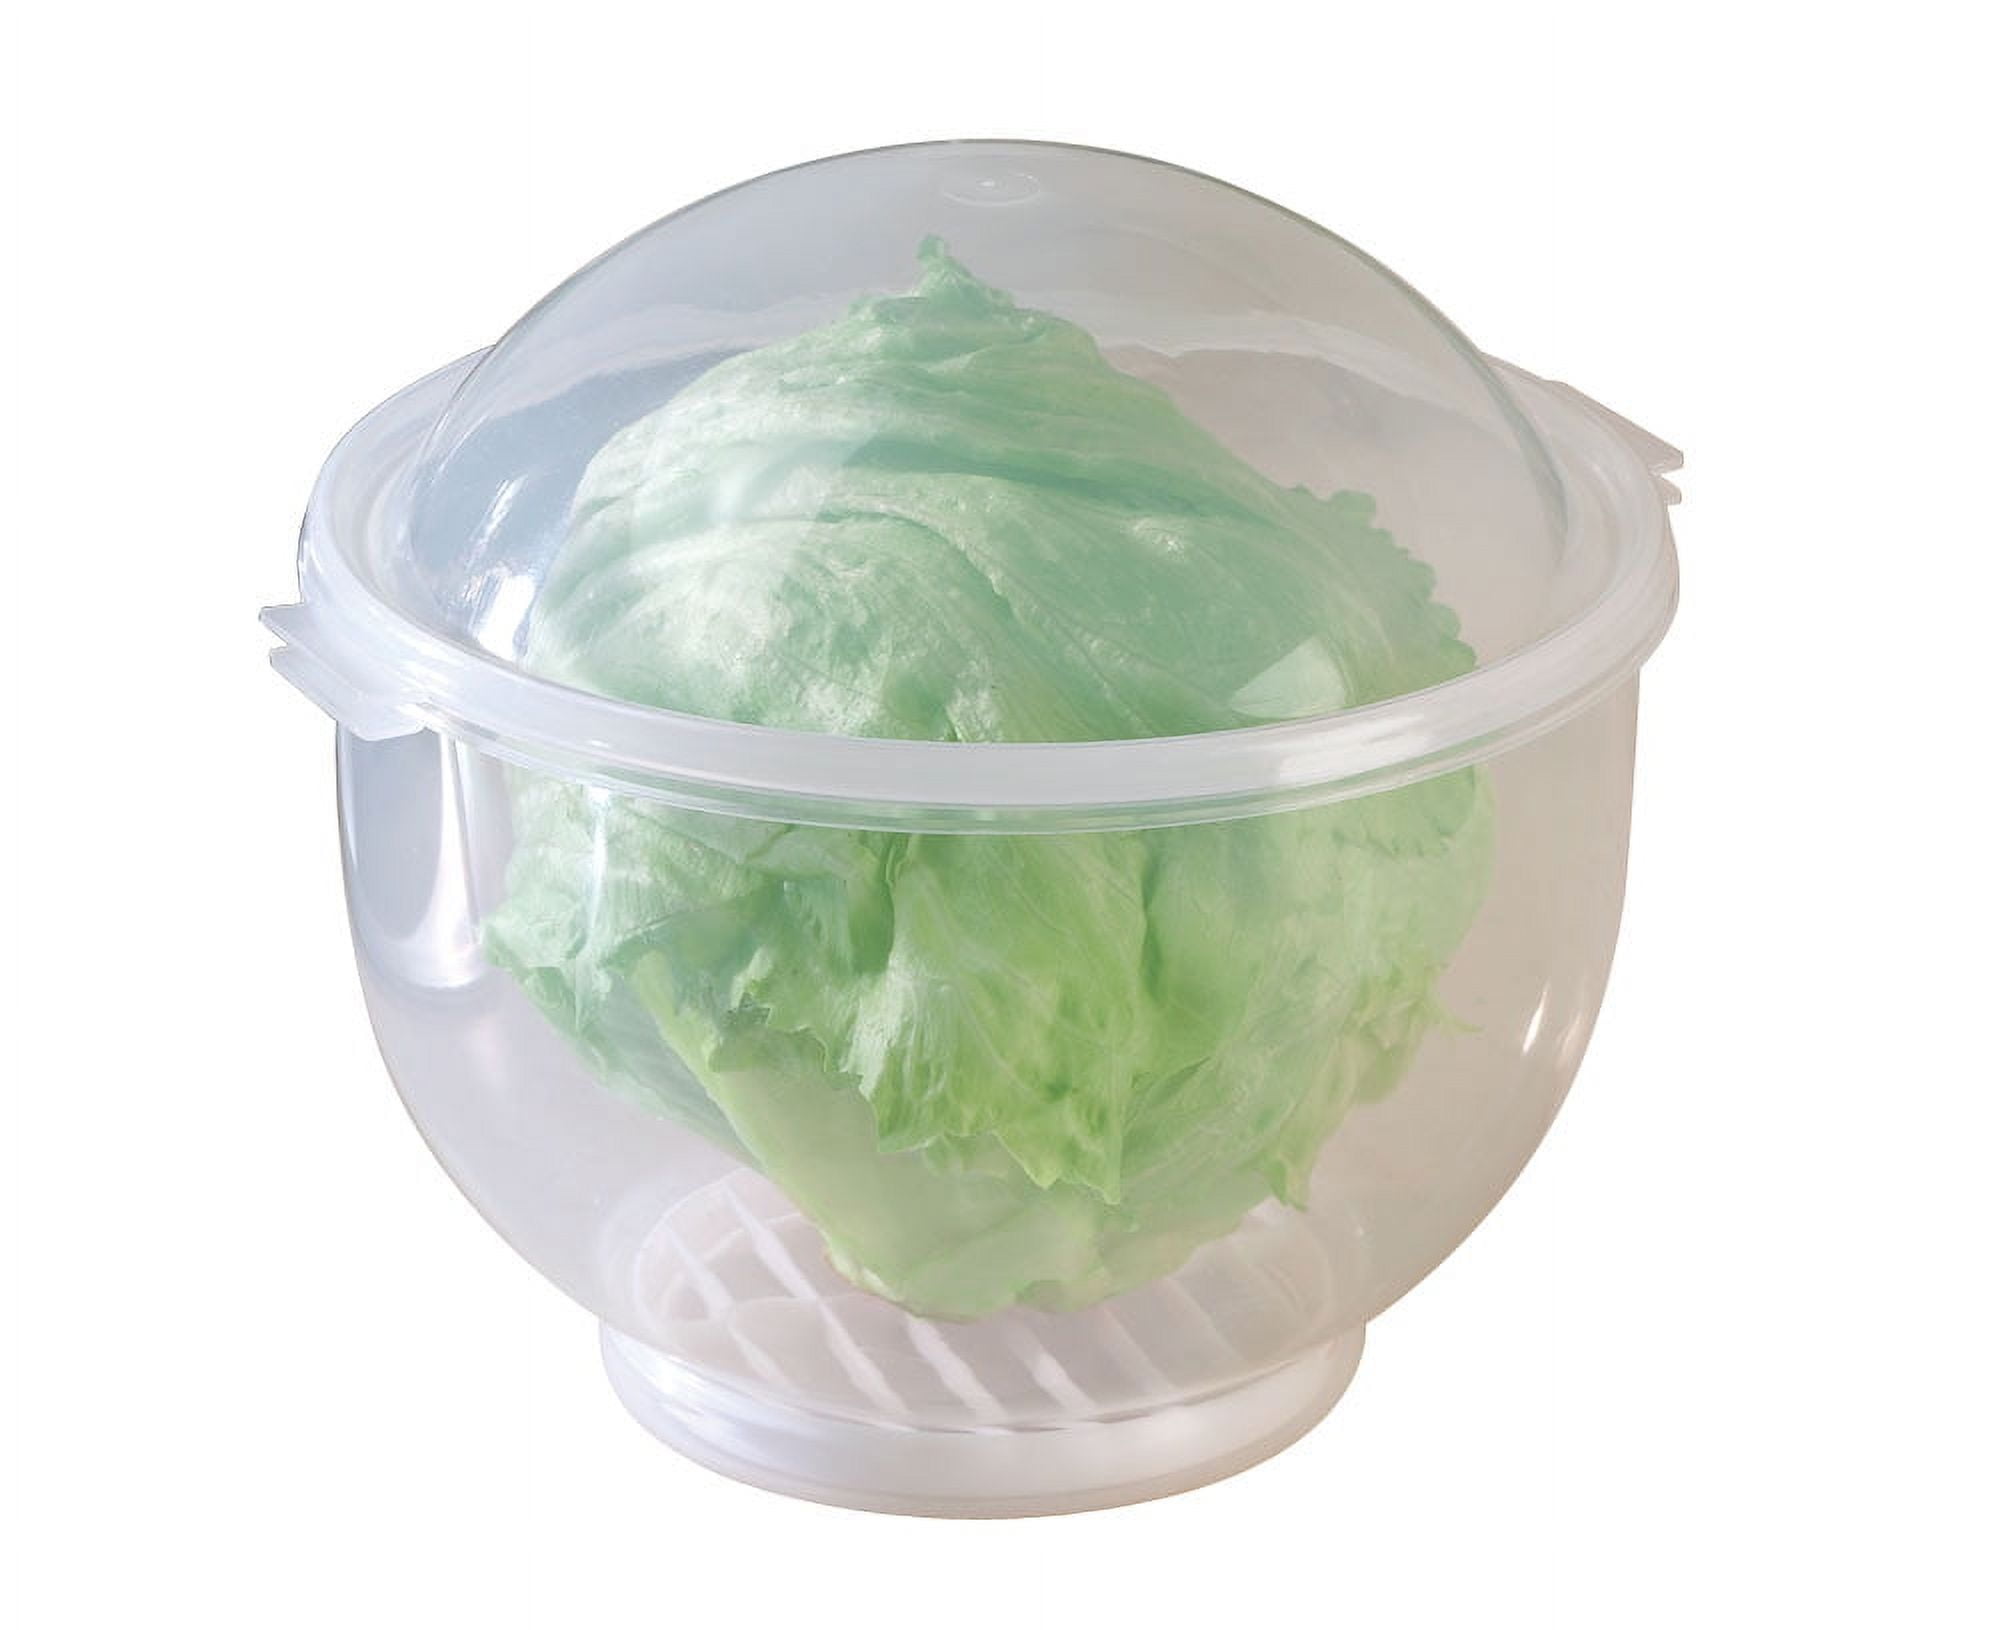 Trenton Gifts Lettuce and Vegatable Storage Keeper | 7 x 8